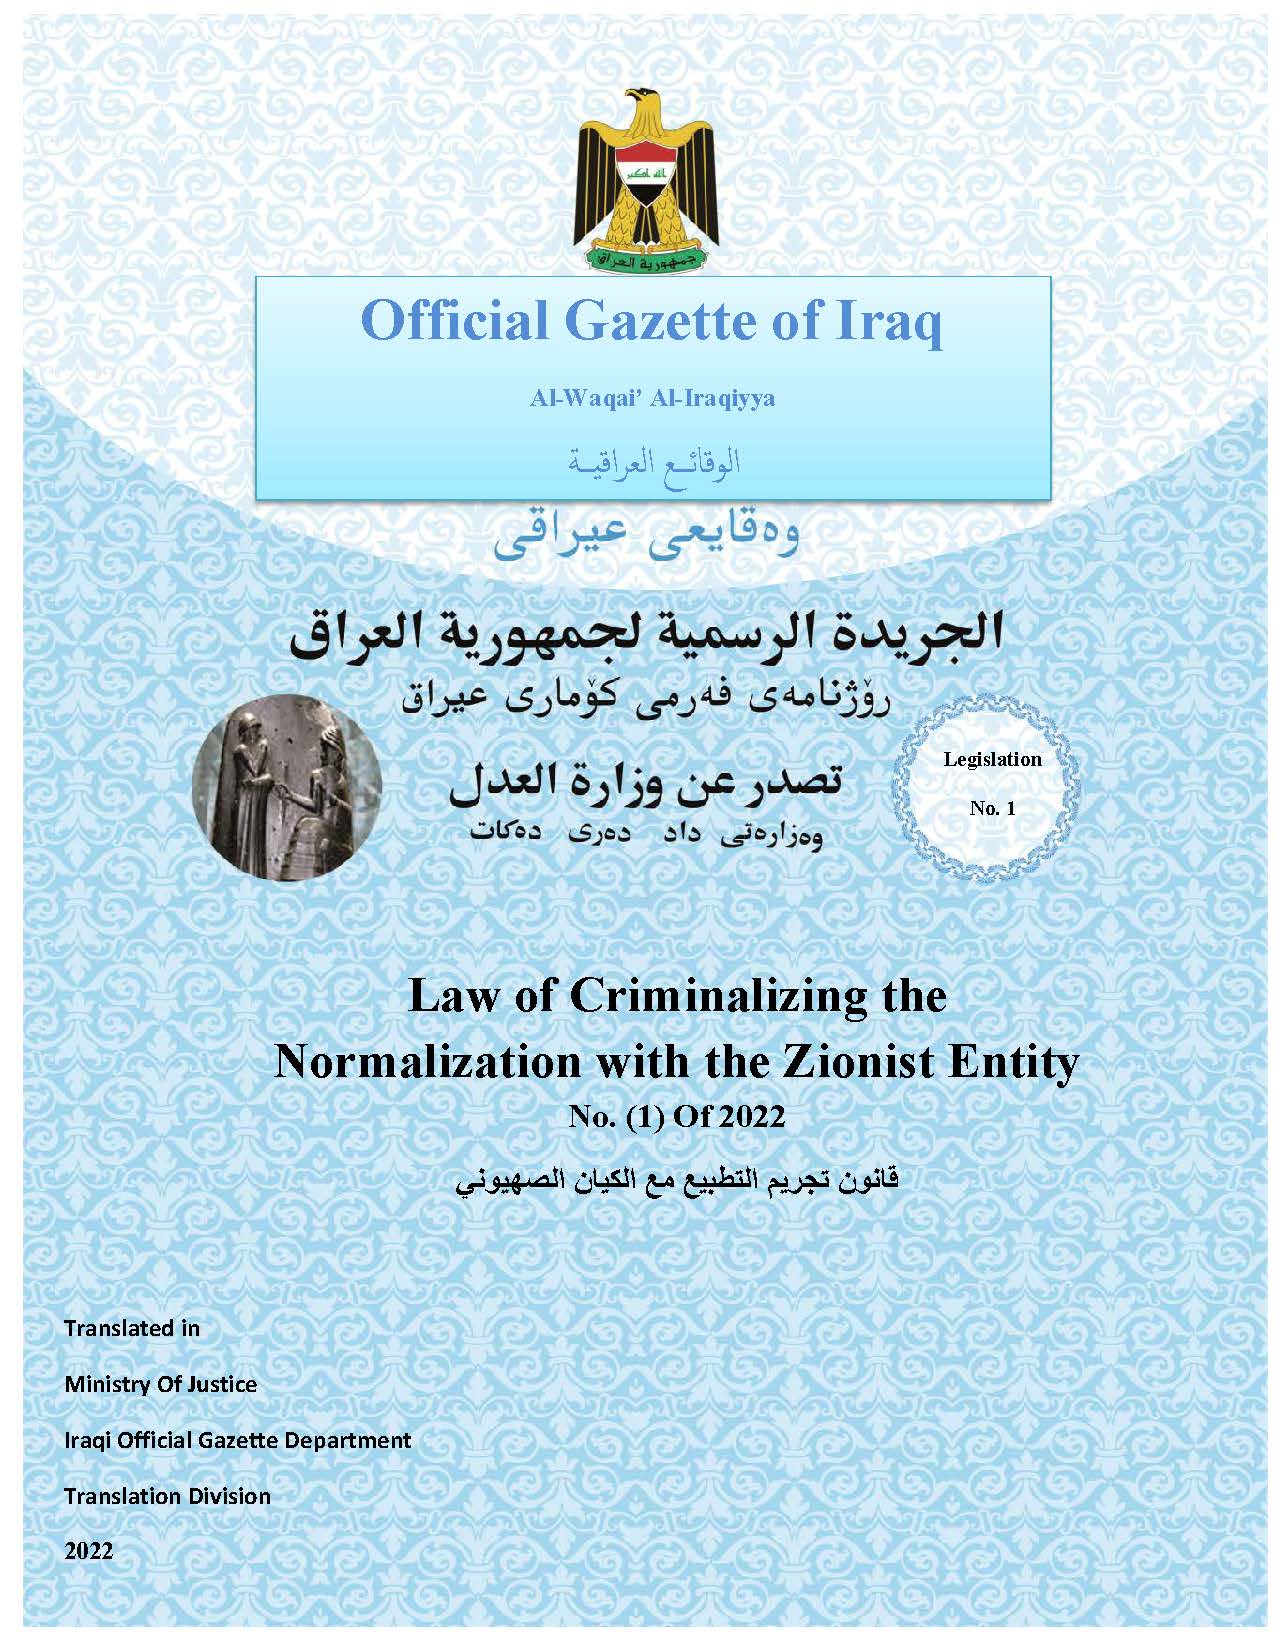 Law of Criminalizing the Normalization with the Zionist Entity No. (1) Of 2022